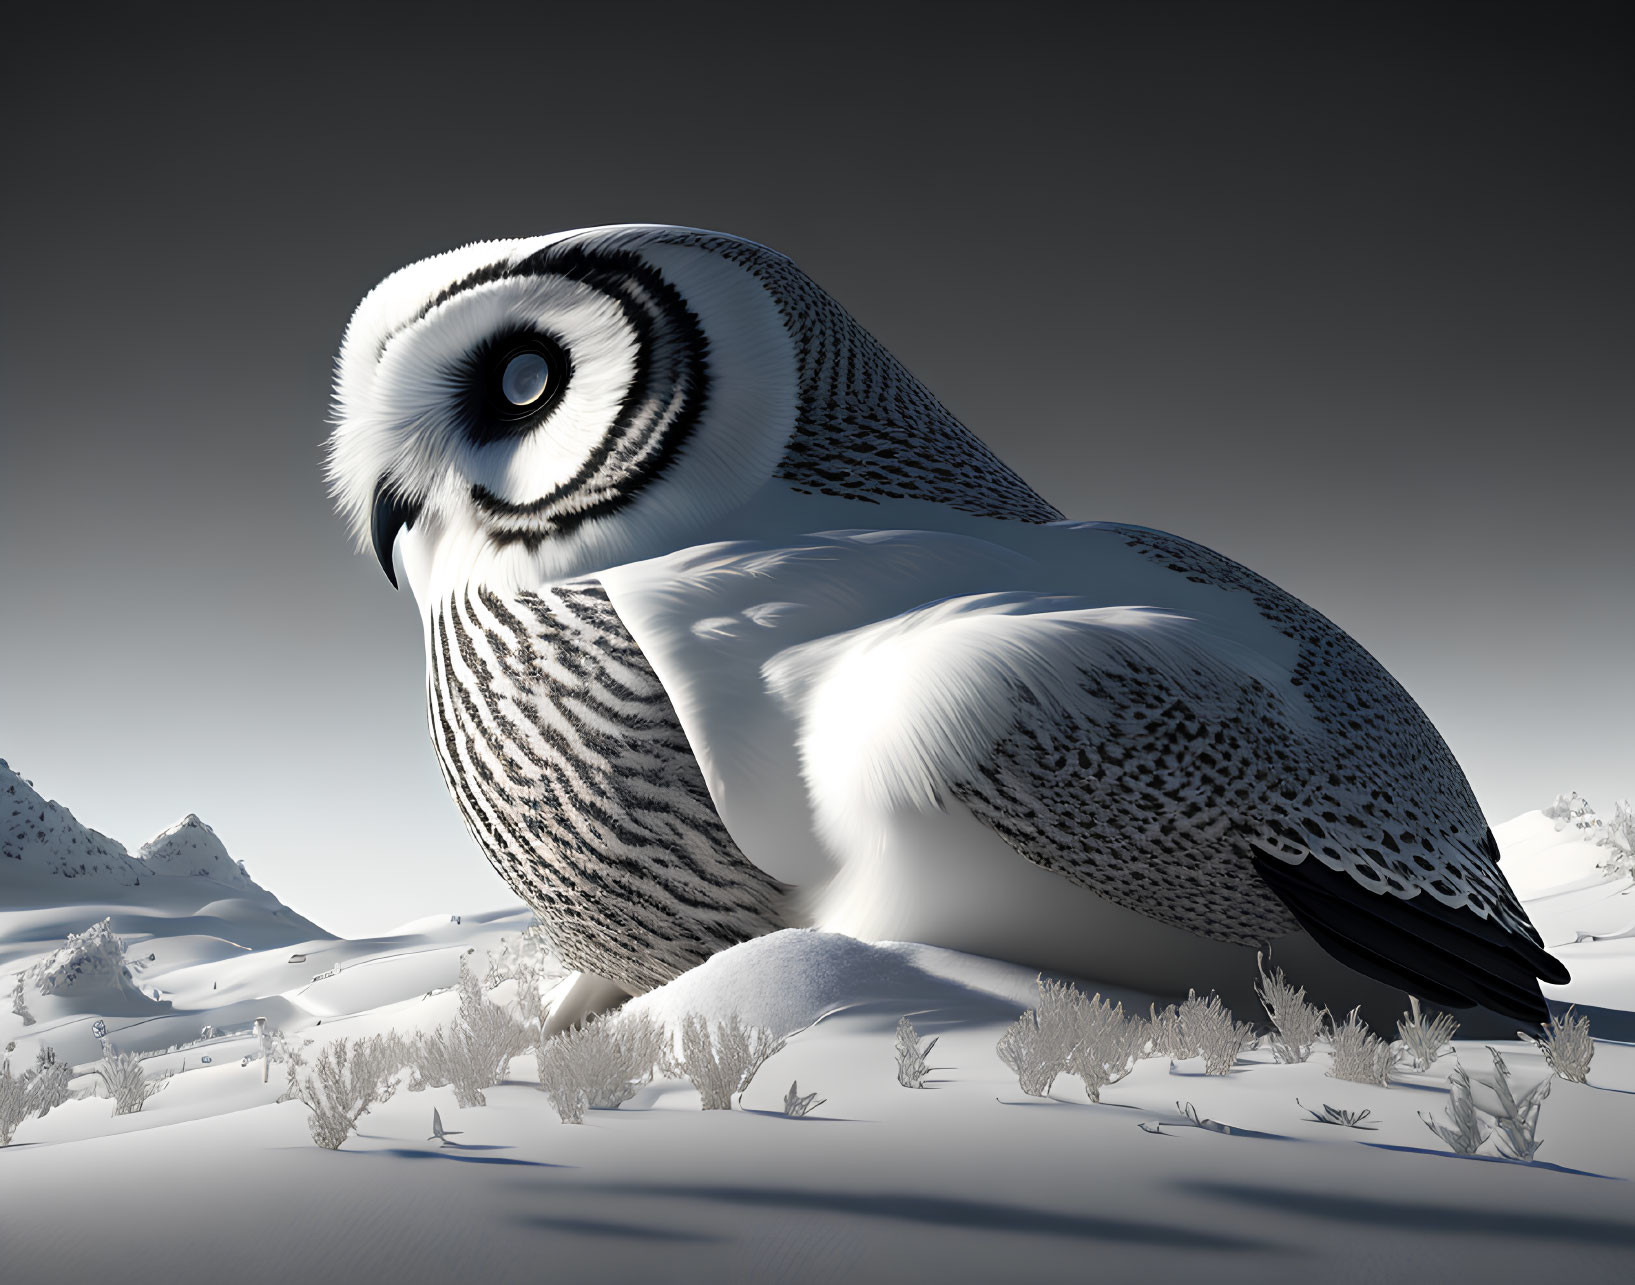 Realistic black and white owl in snowy mountain landscape